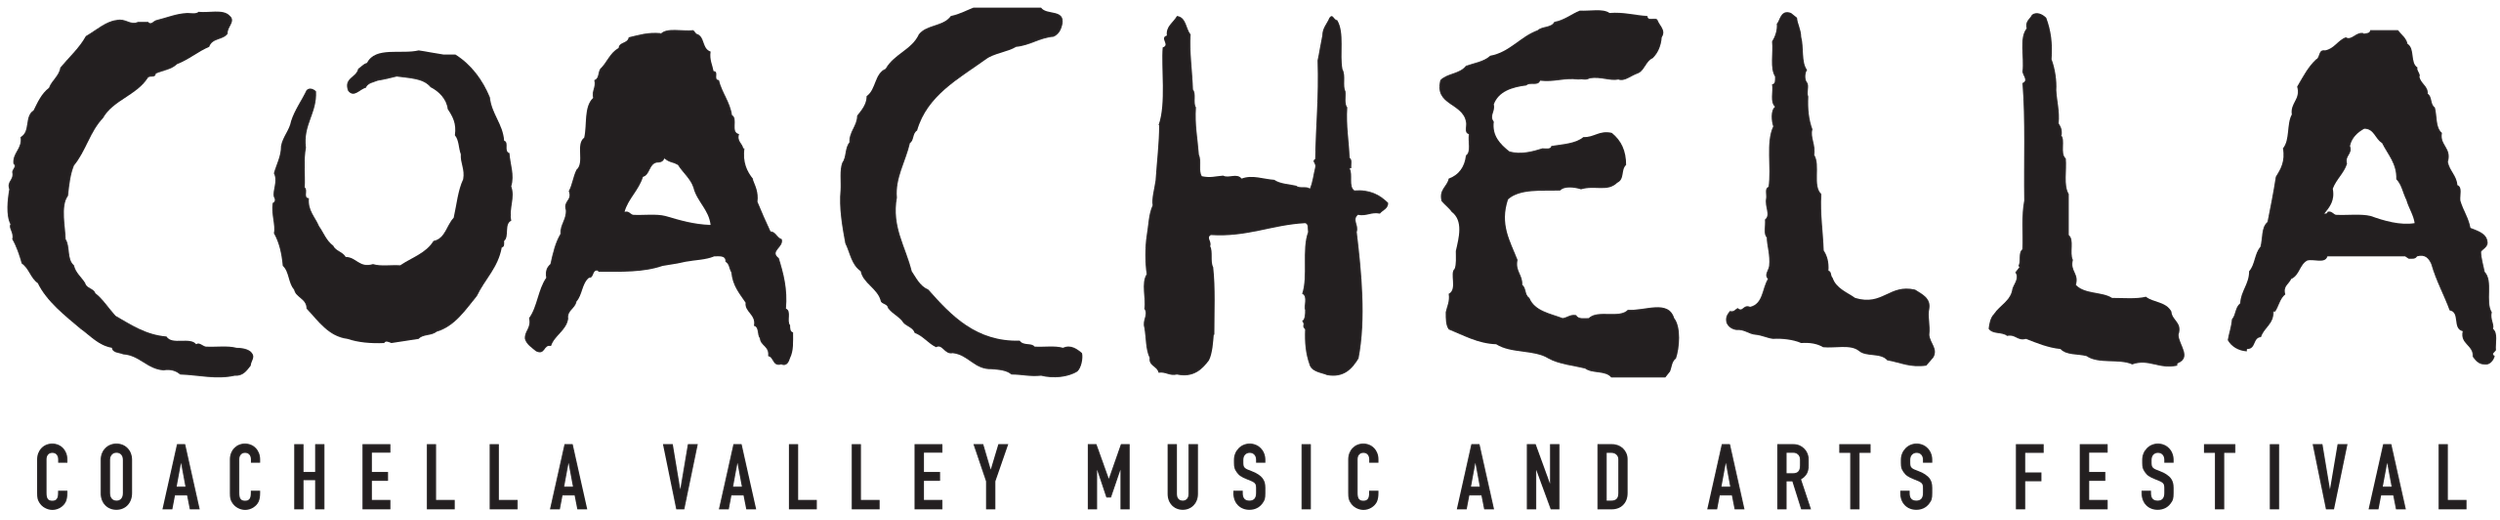 Coachella_Valley_Music_and_Arts_Festival_logo.svg.png